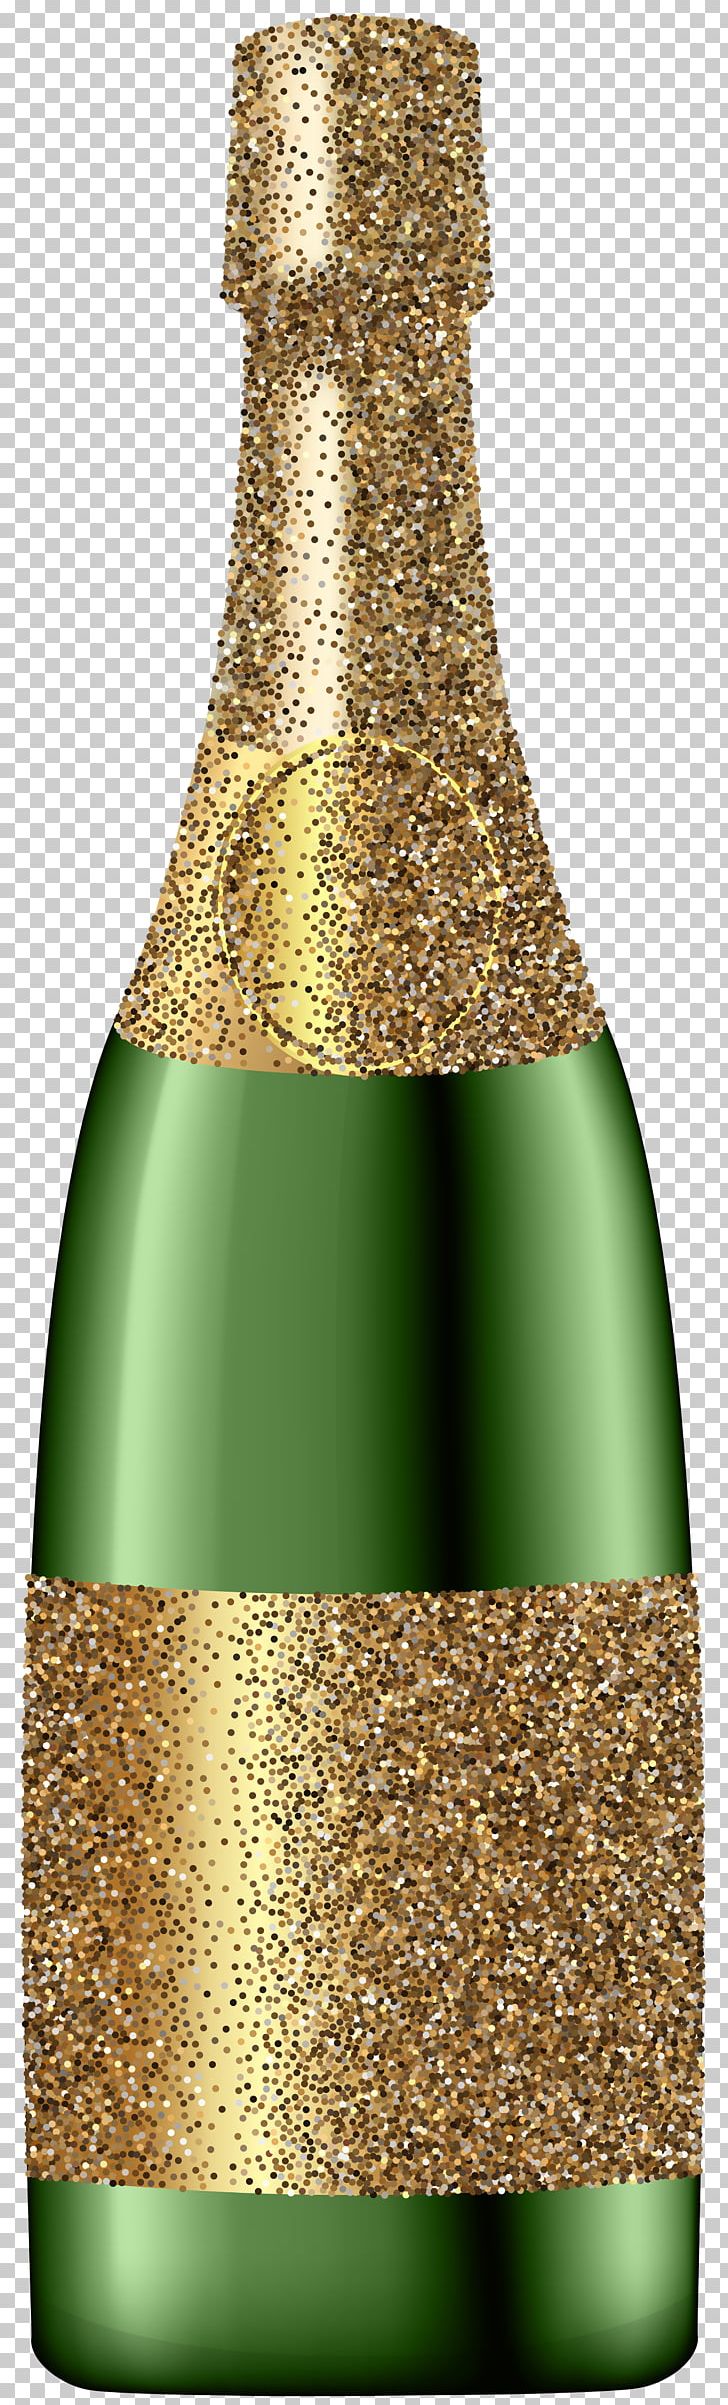 Champagne Cocktail Bottle Sparkling Wine PNG, Clipart, Beer Bottle, Bottle, Champagne, Champagne Cocktail, Champagne Glass Free PNG Download